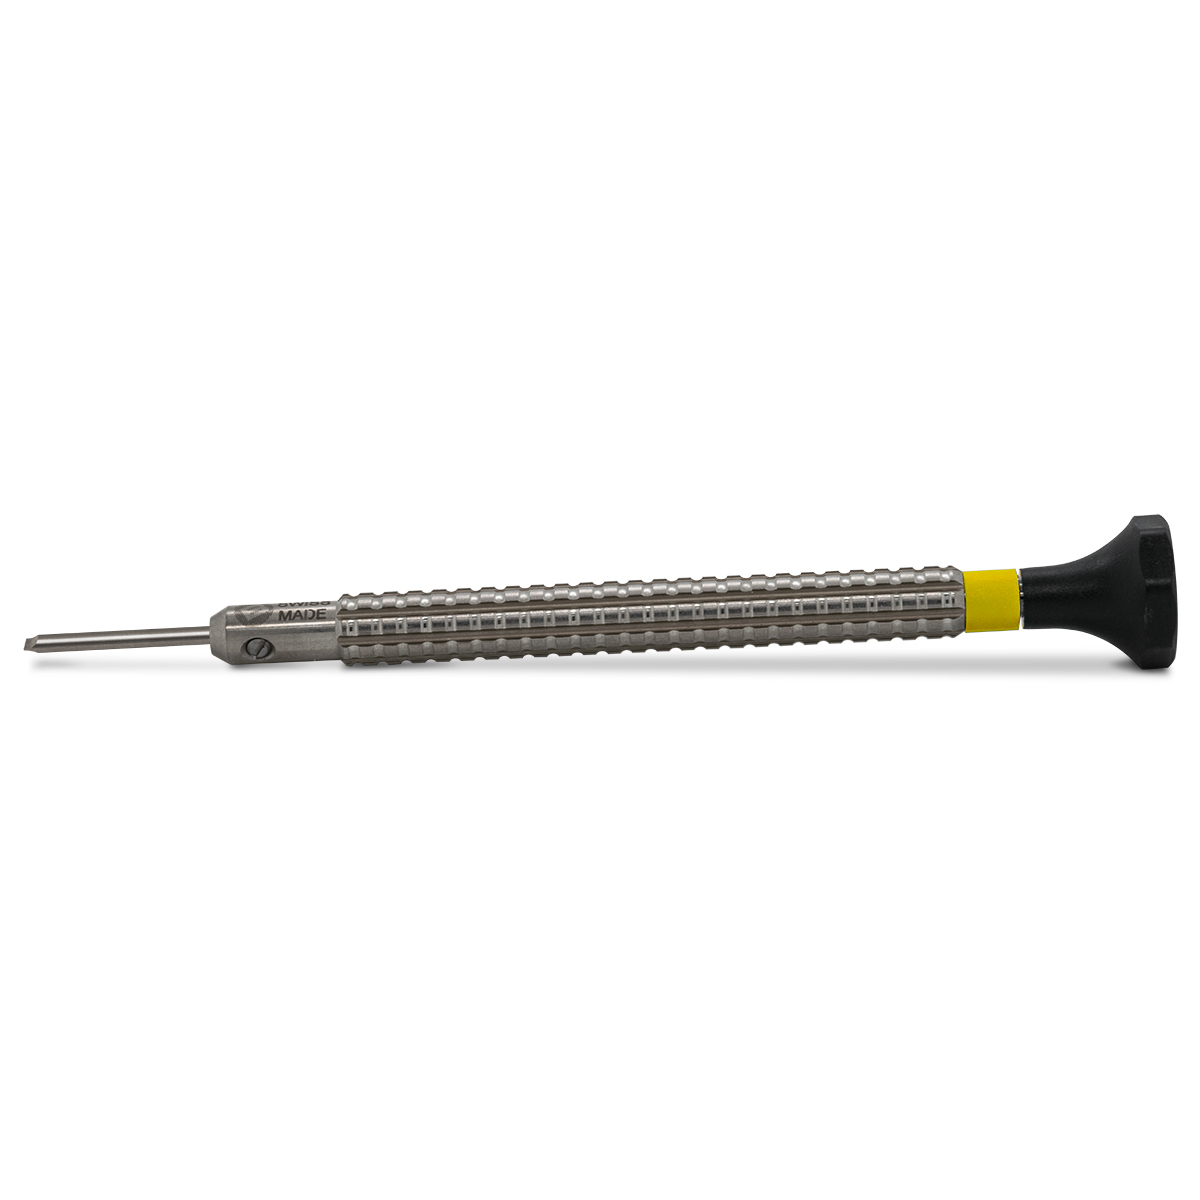 Bergeon 7965-MFP-080 screwdriver, blade 0,8 mm, parallel-flanks, yellow, for torque cylinders